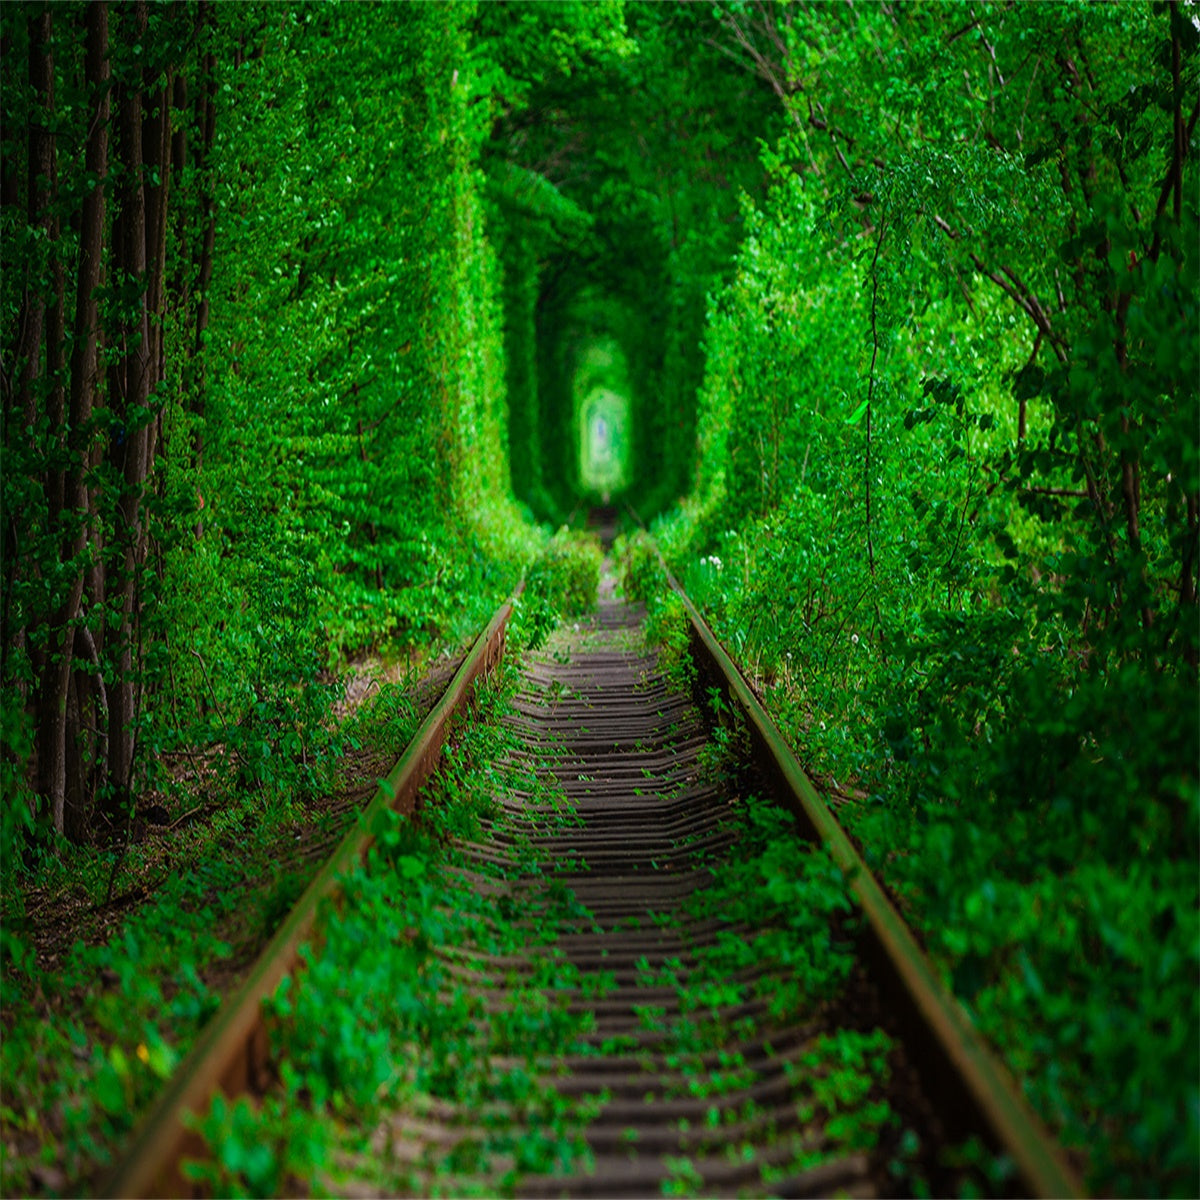 Train Track Spring Green Forest Scenery Backdrop